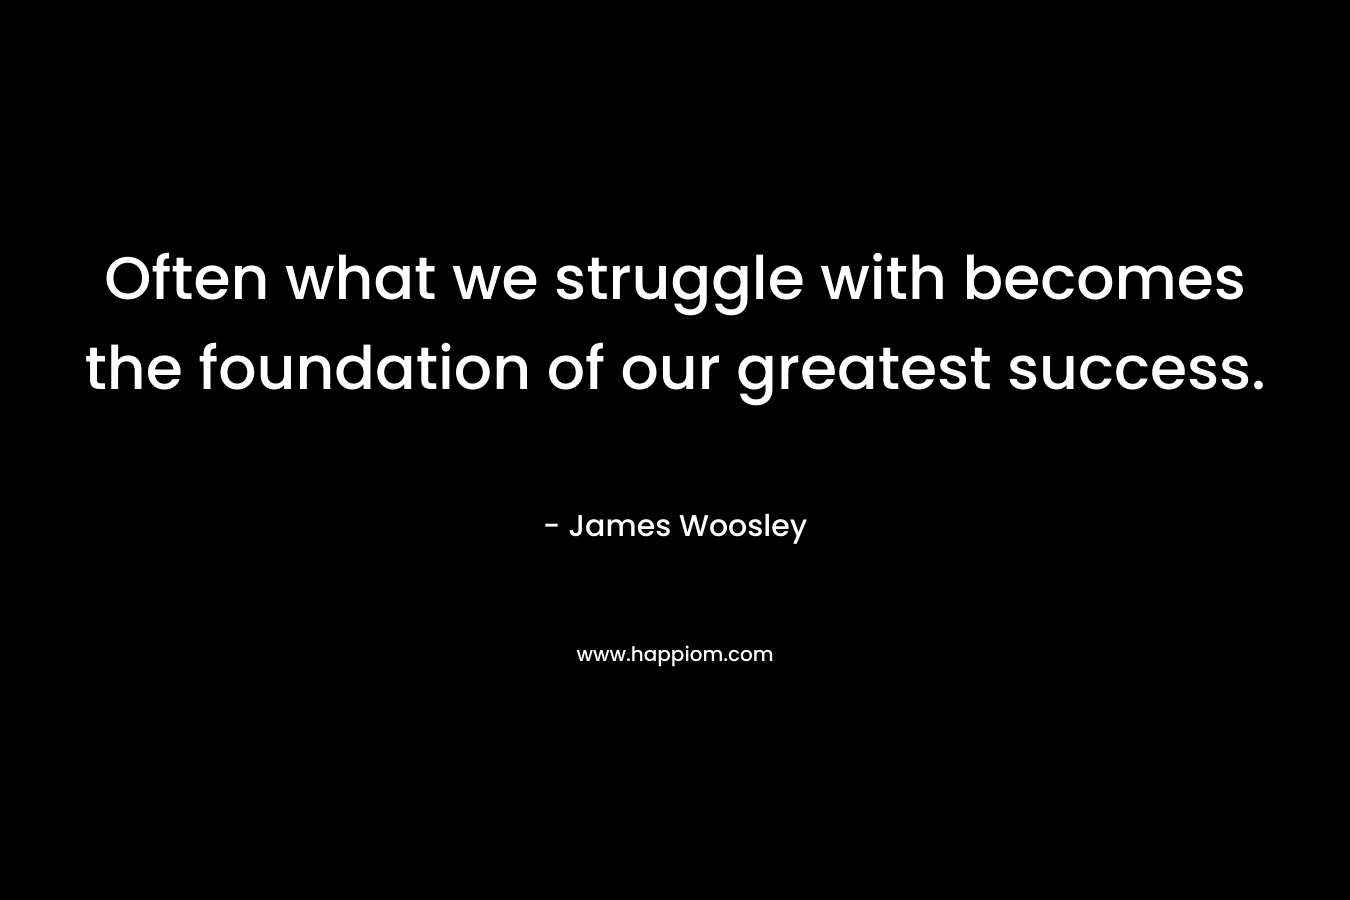 Often what we struggle with becomes the foundation of our greatest success. – James Woosley